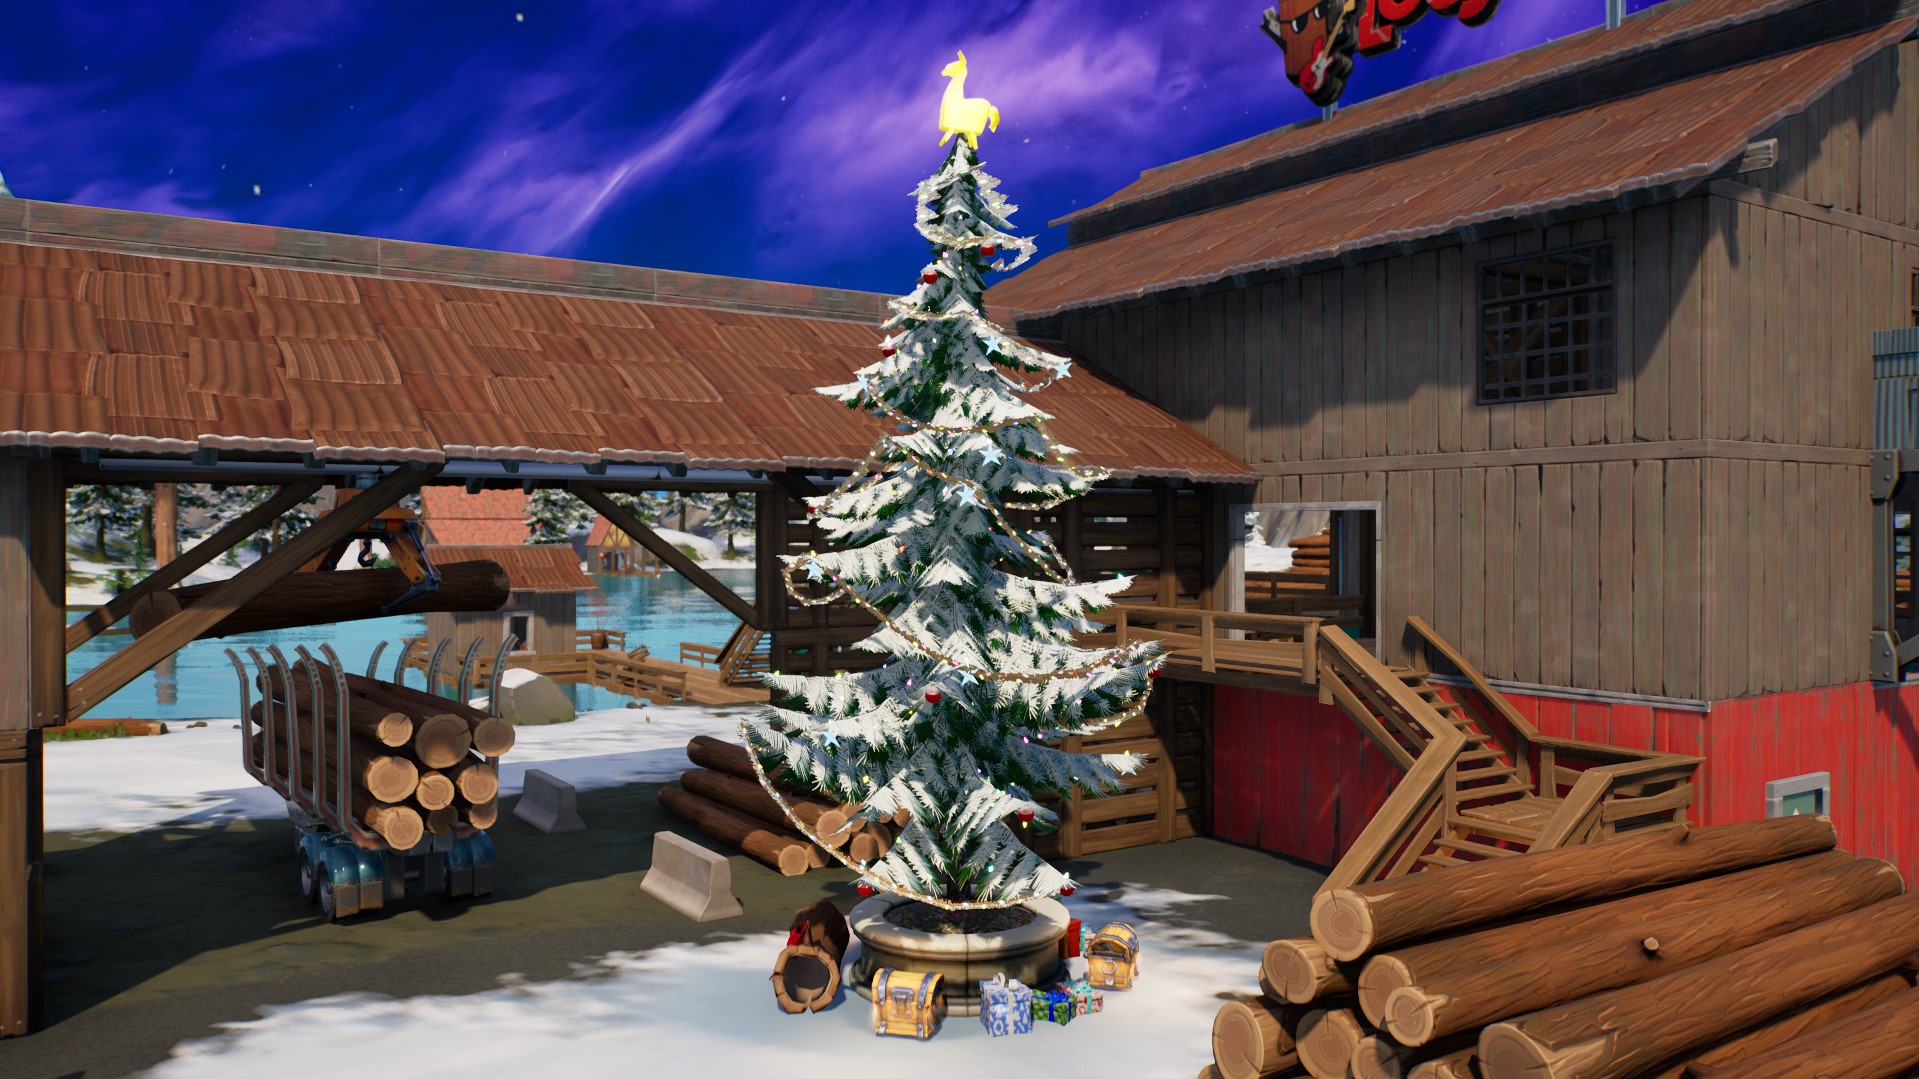 Search a treasure chest under a holiday tree - Winterfest 2021 challenge  